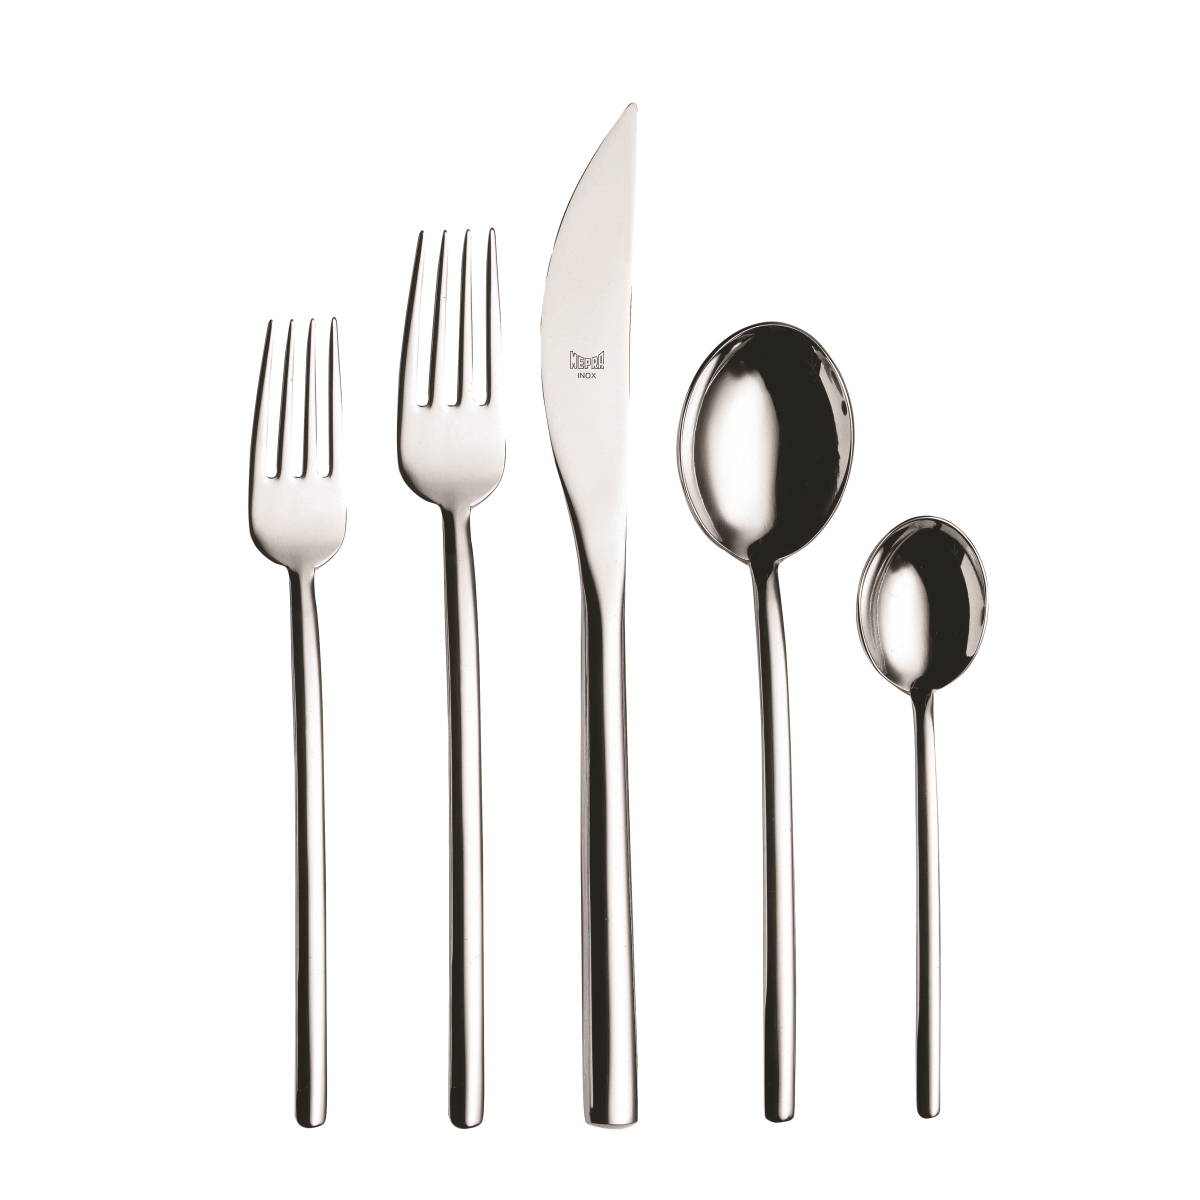 104422005 Stainless Steel Due Cutlery Set - 5 Piece